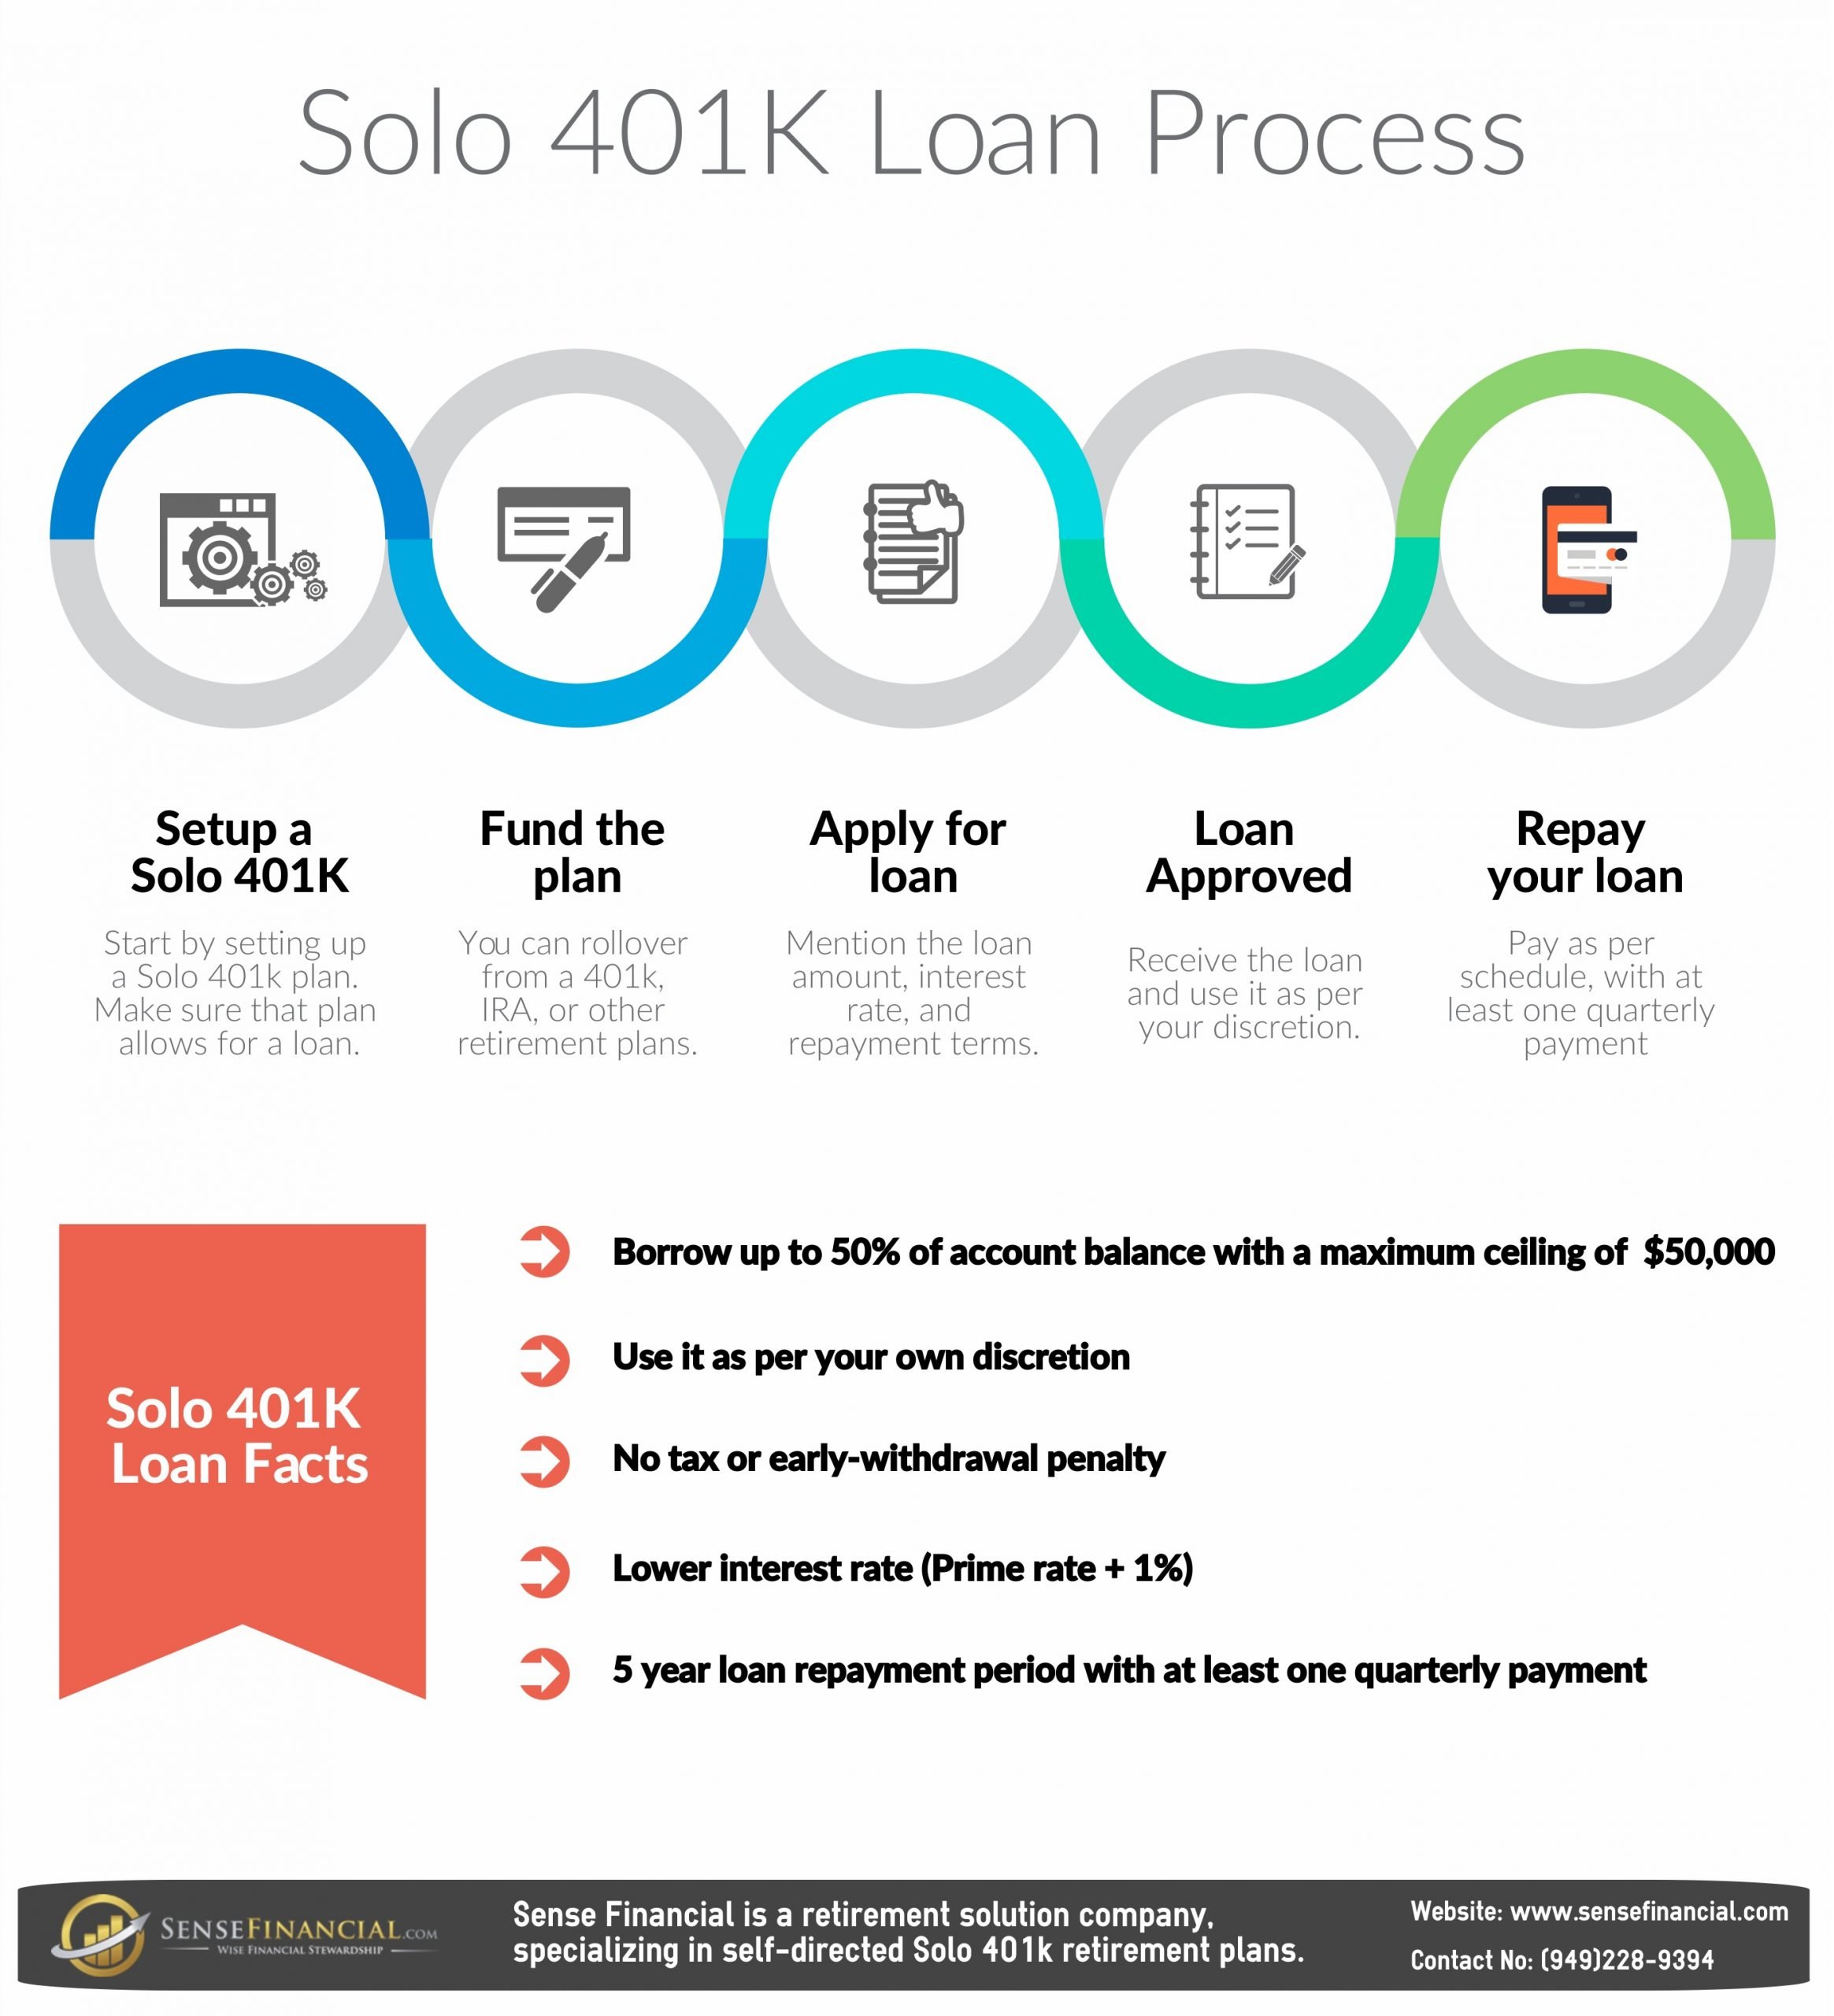 Solo 401 k Loan: What could go wrong without proper knowledge?